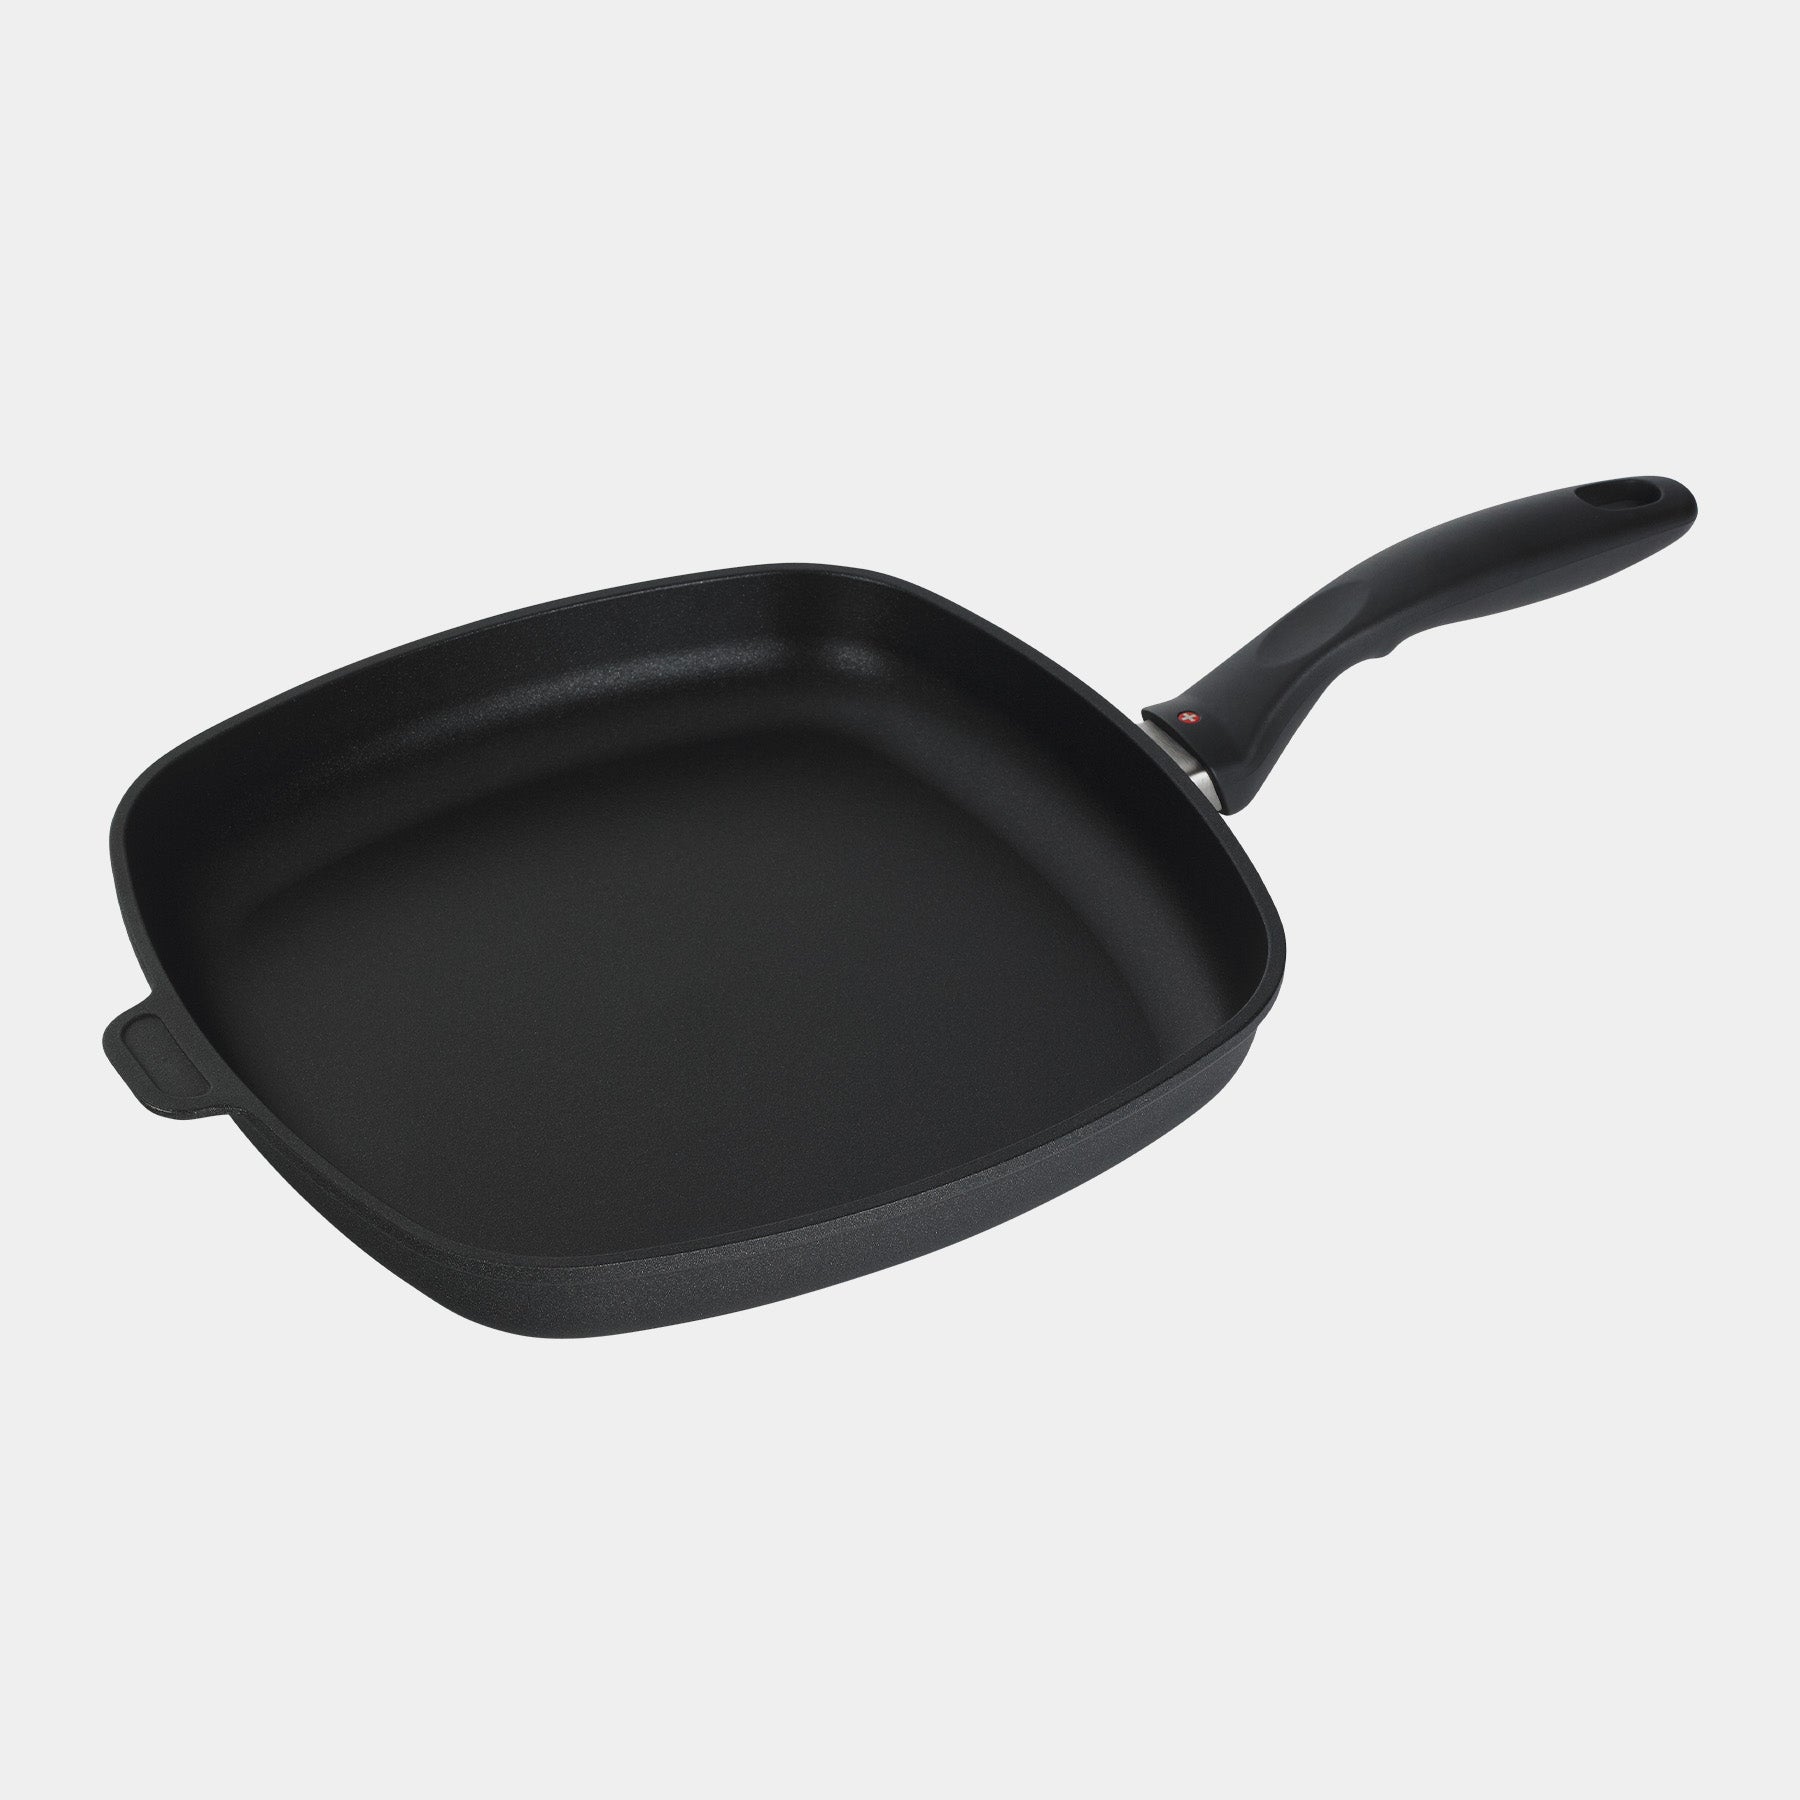 XD Nonstick 11" x 11" Square Fry Pan - Induction - top view